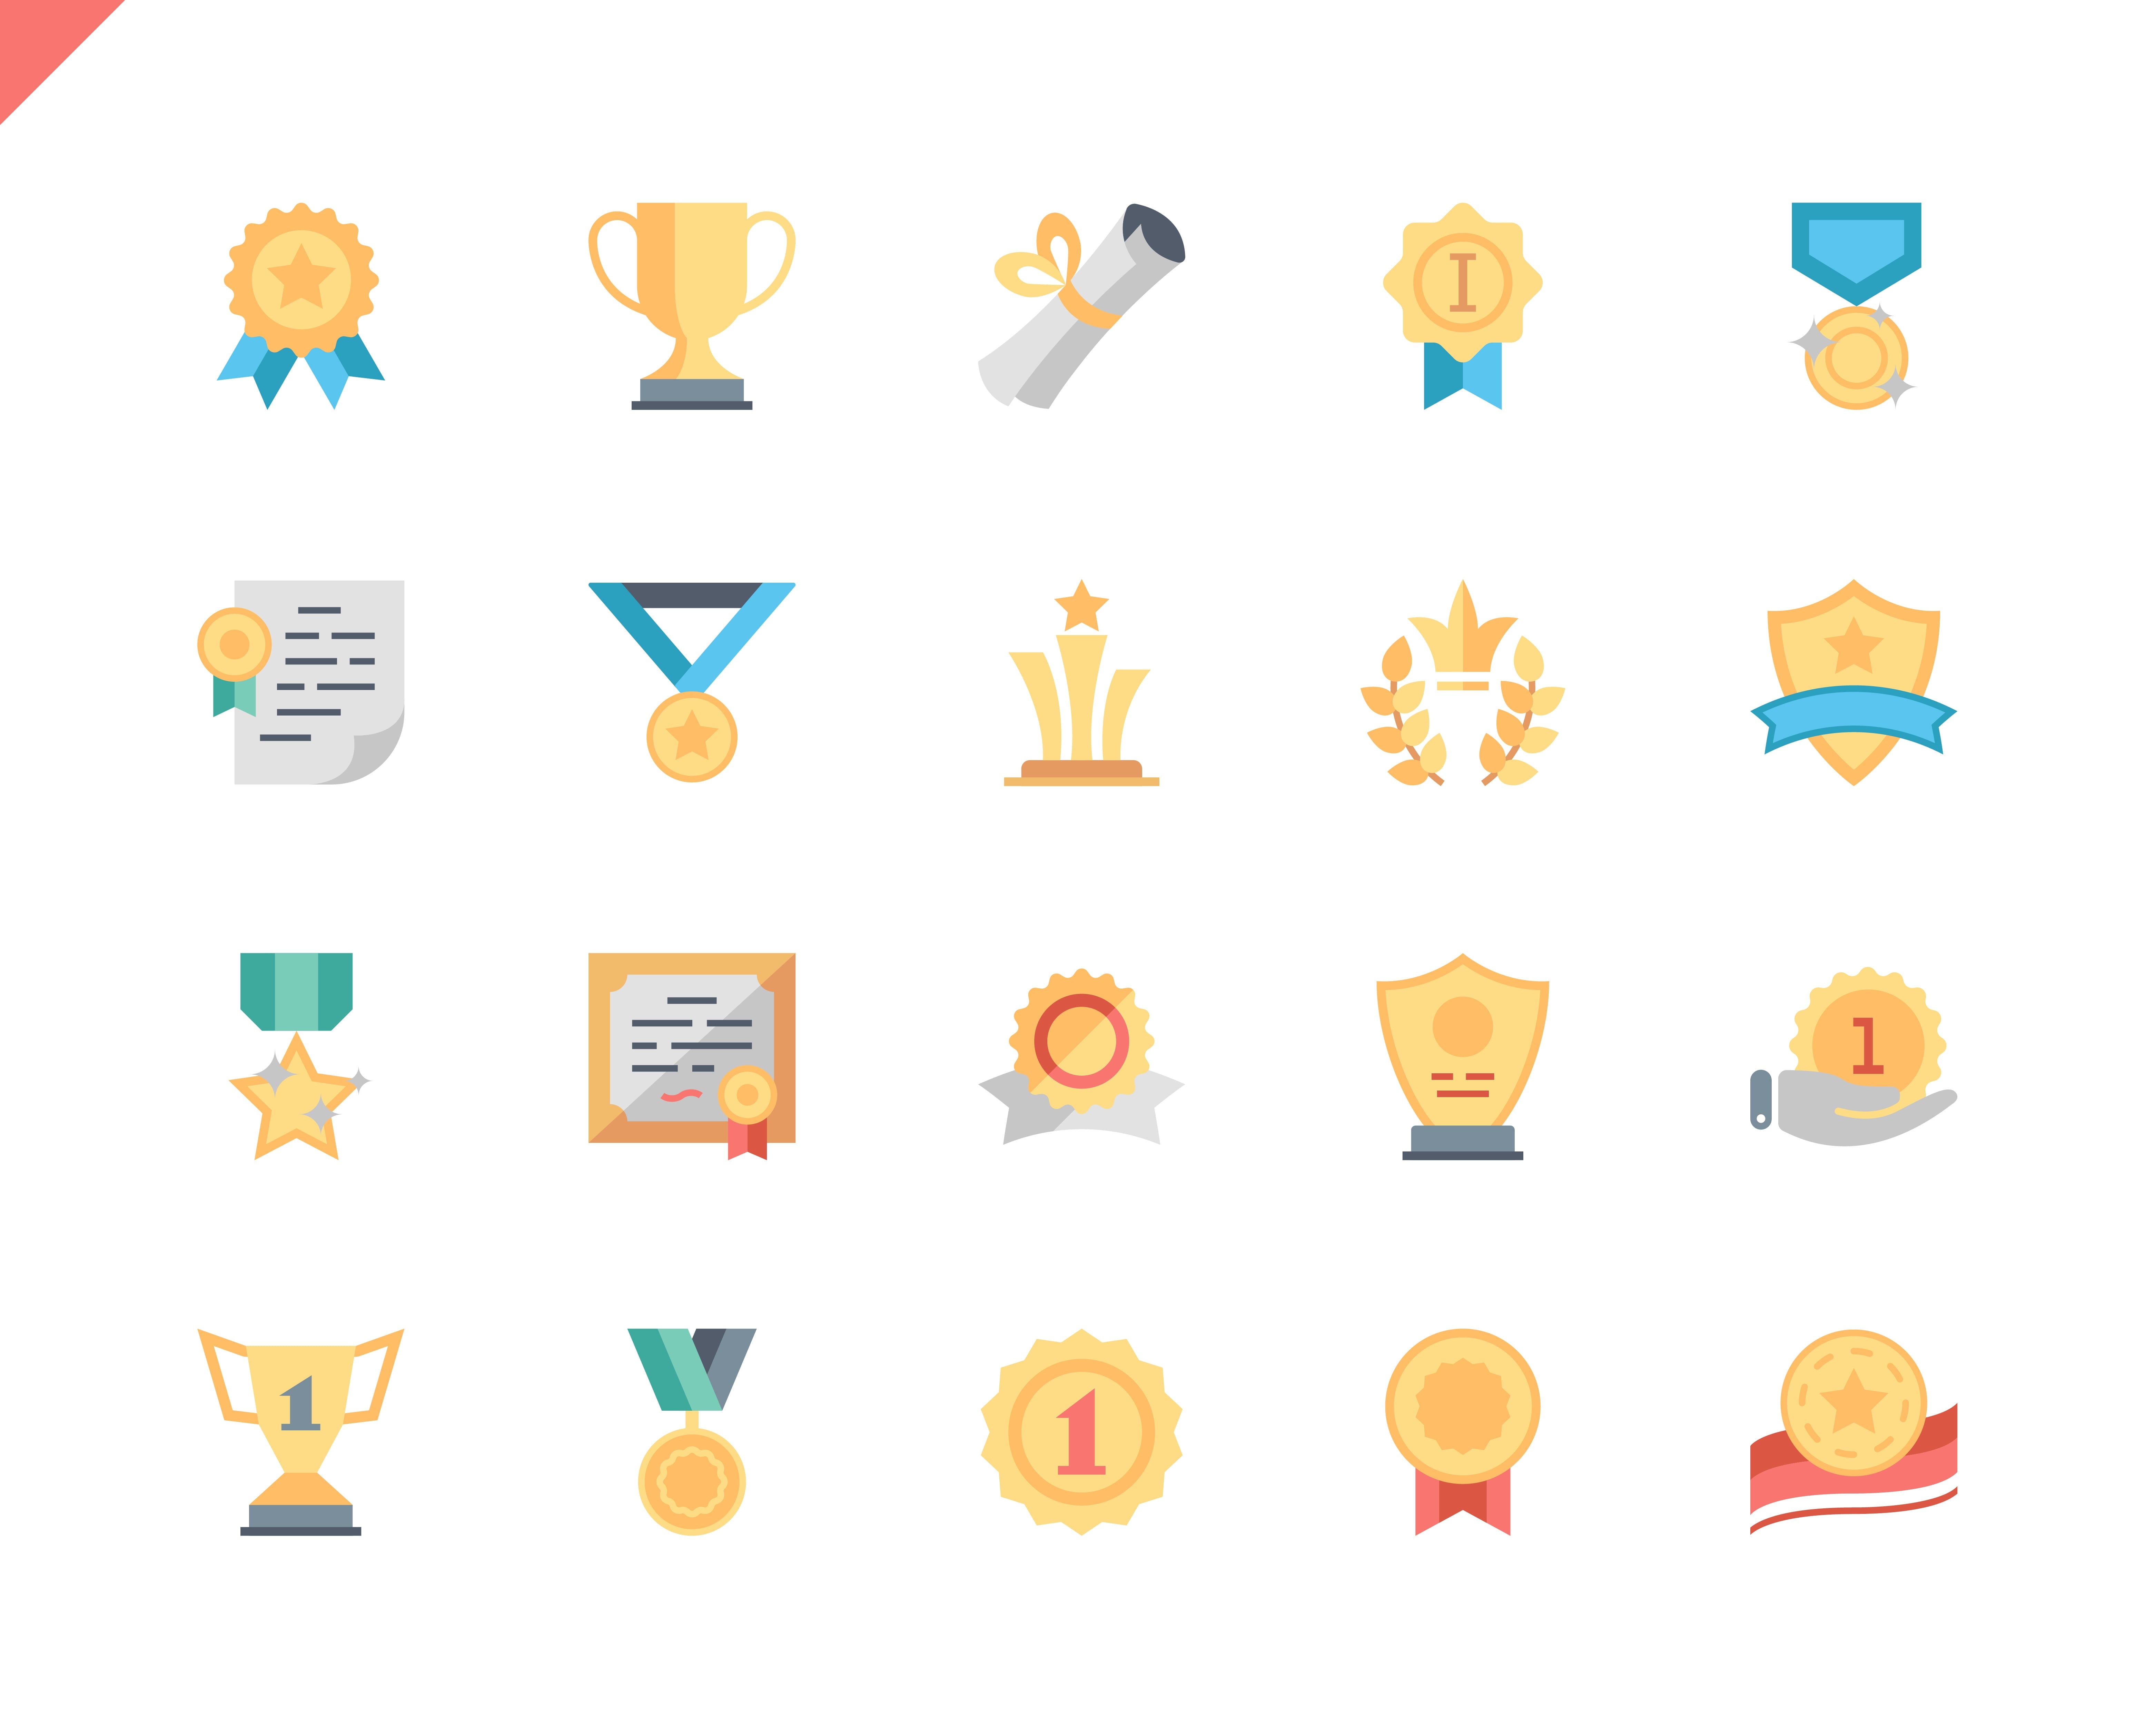 Simple Set Awards Flat Icons for Website and Mobile Apps. Contains such Icons as Ribbon, Medal, Certificate, Star, Prize. 48x48 Pixel Perfect. Vector illustration.